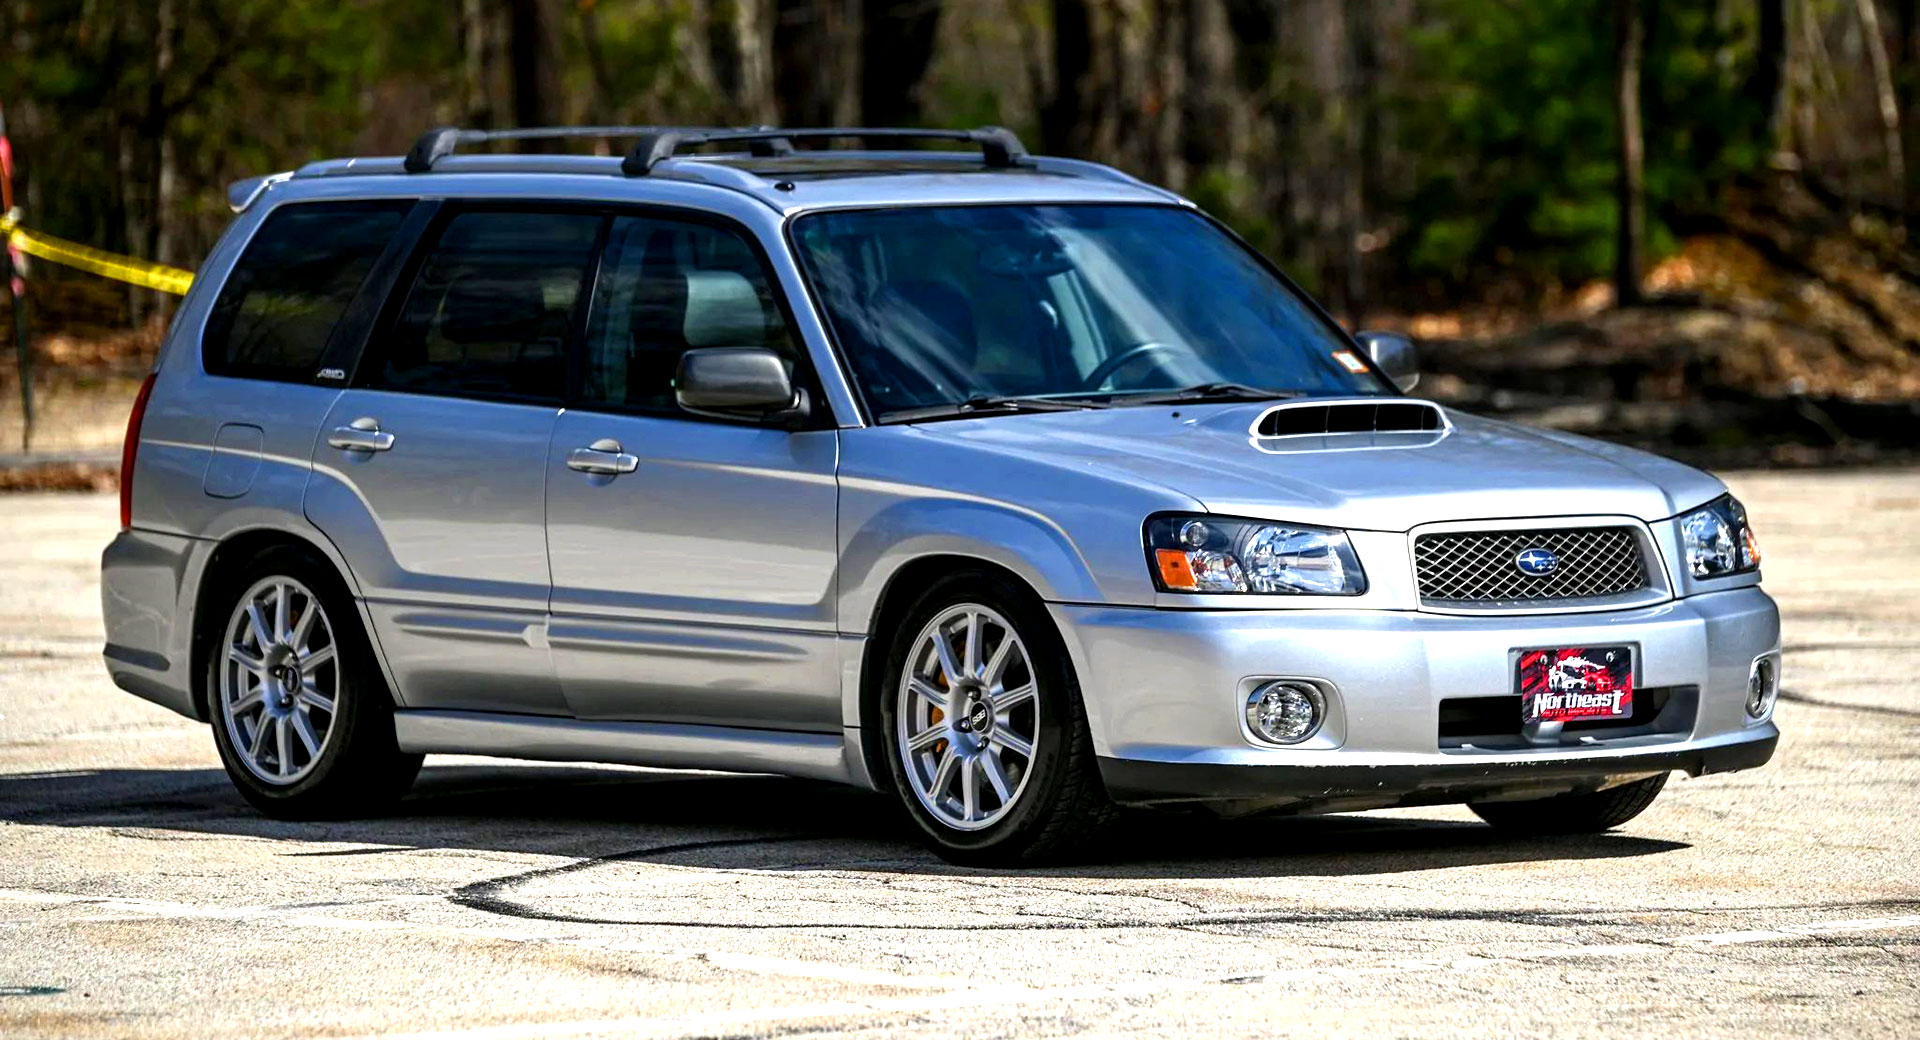 Custom Made 2004 Subaru Forester With A WRX STI Engine And 6sp Manual Is  Calling For You | Carscoops